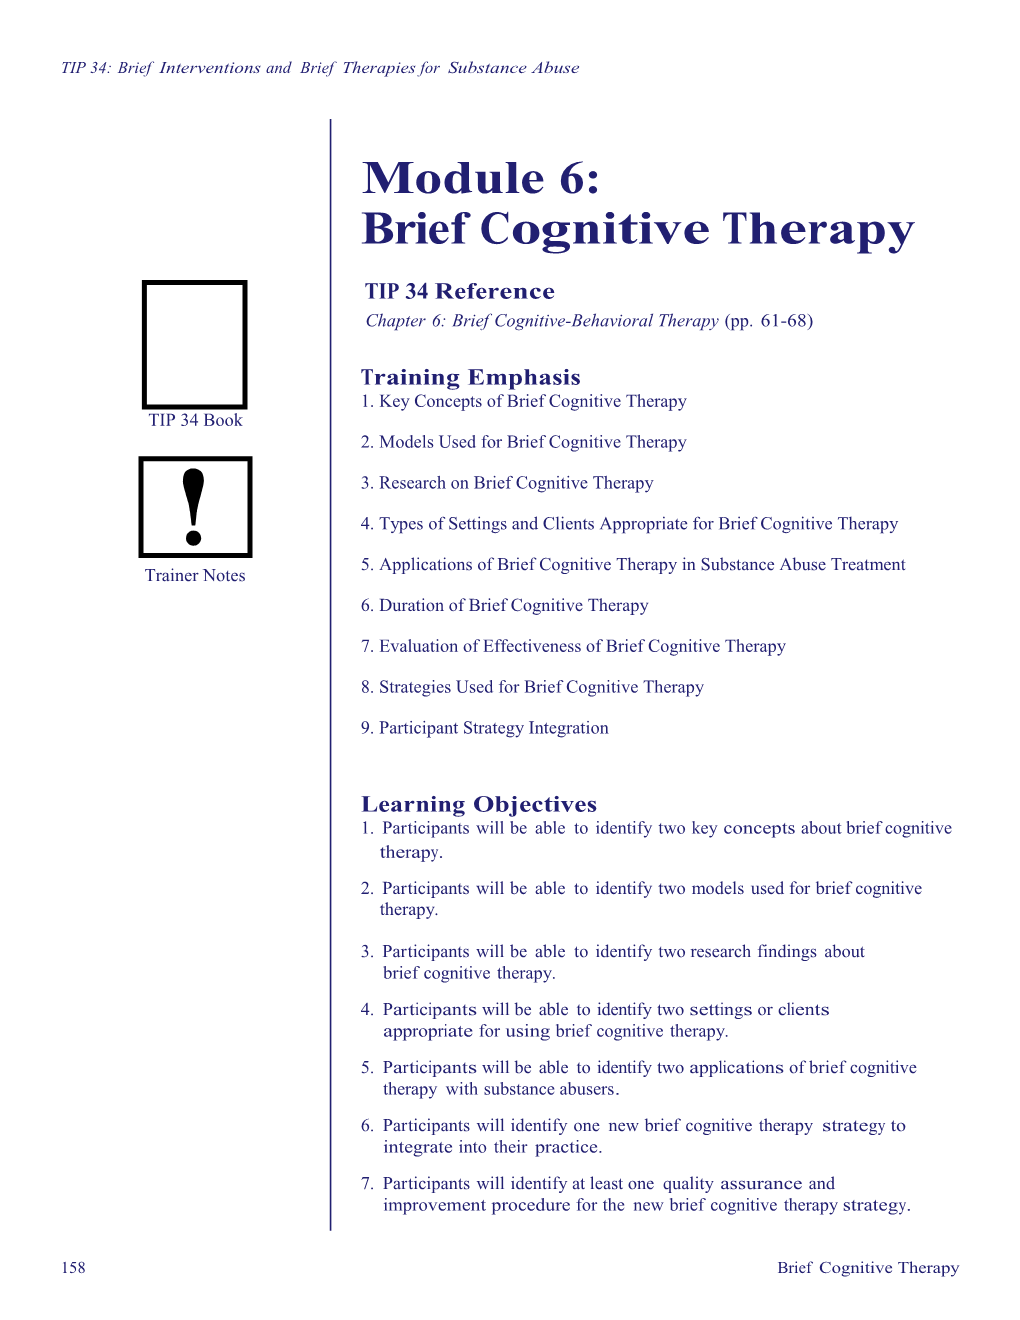 Chapter6:Briefcognitive-Behavioraltherapy (Pp.61-68)